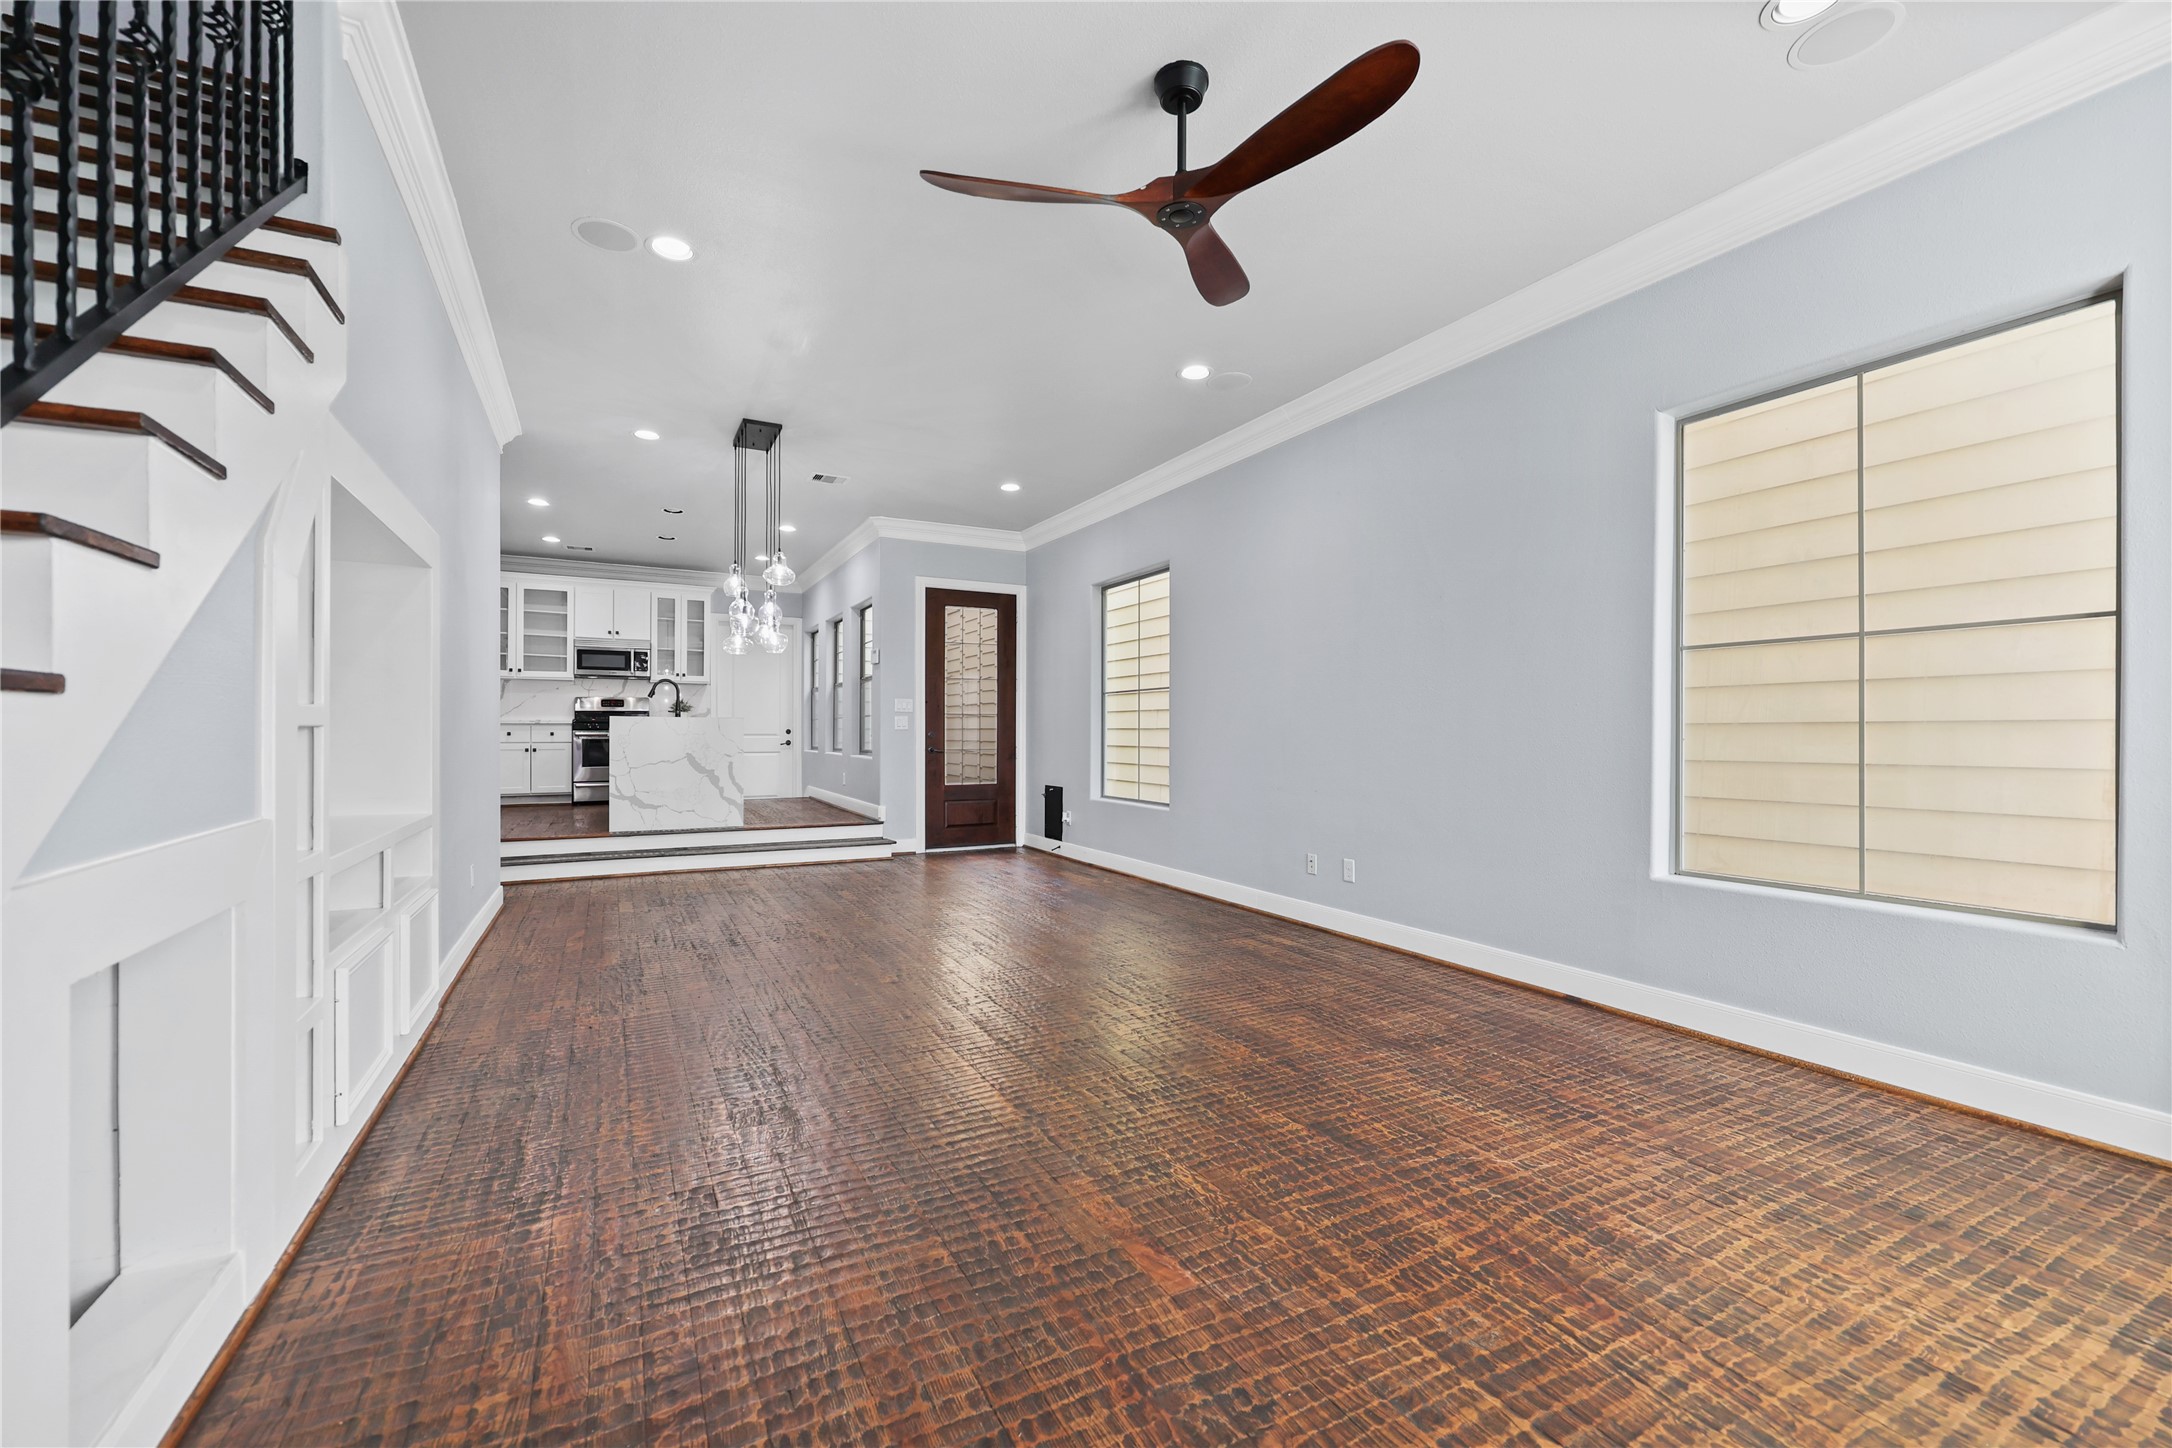 HAND-SCRAPED HARDWOOD FLOORING GRACES THE MAIN LEVEL AND IS ACCENTED BY A CHIC CEILING FAN.